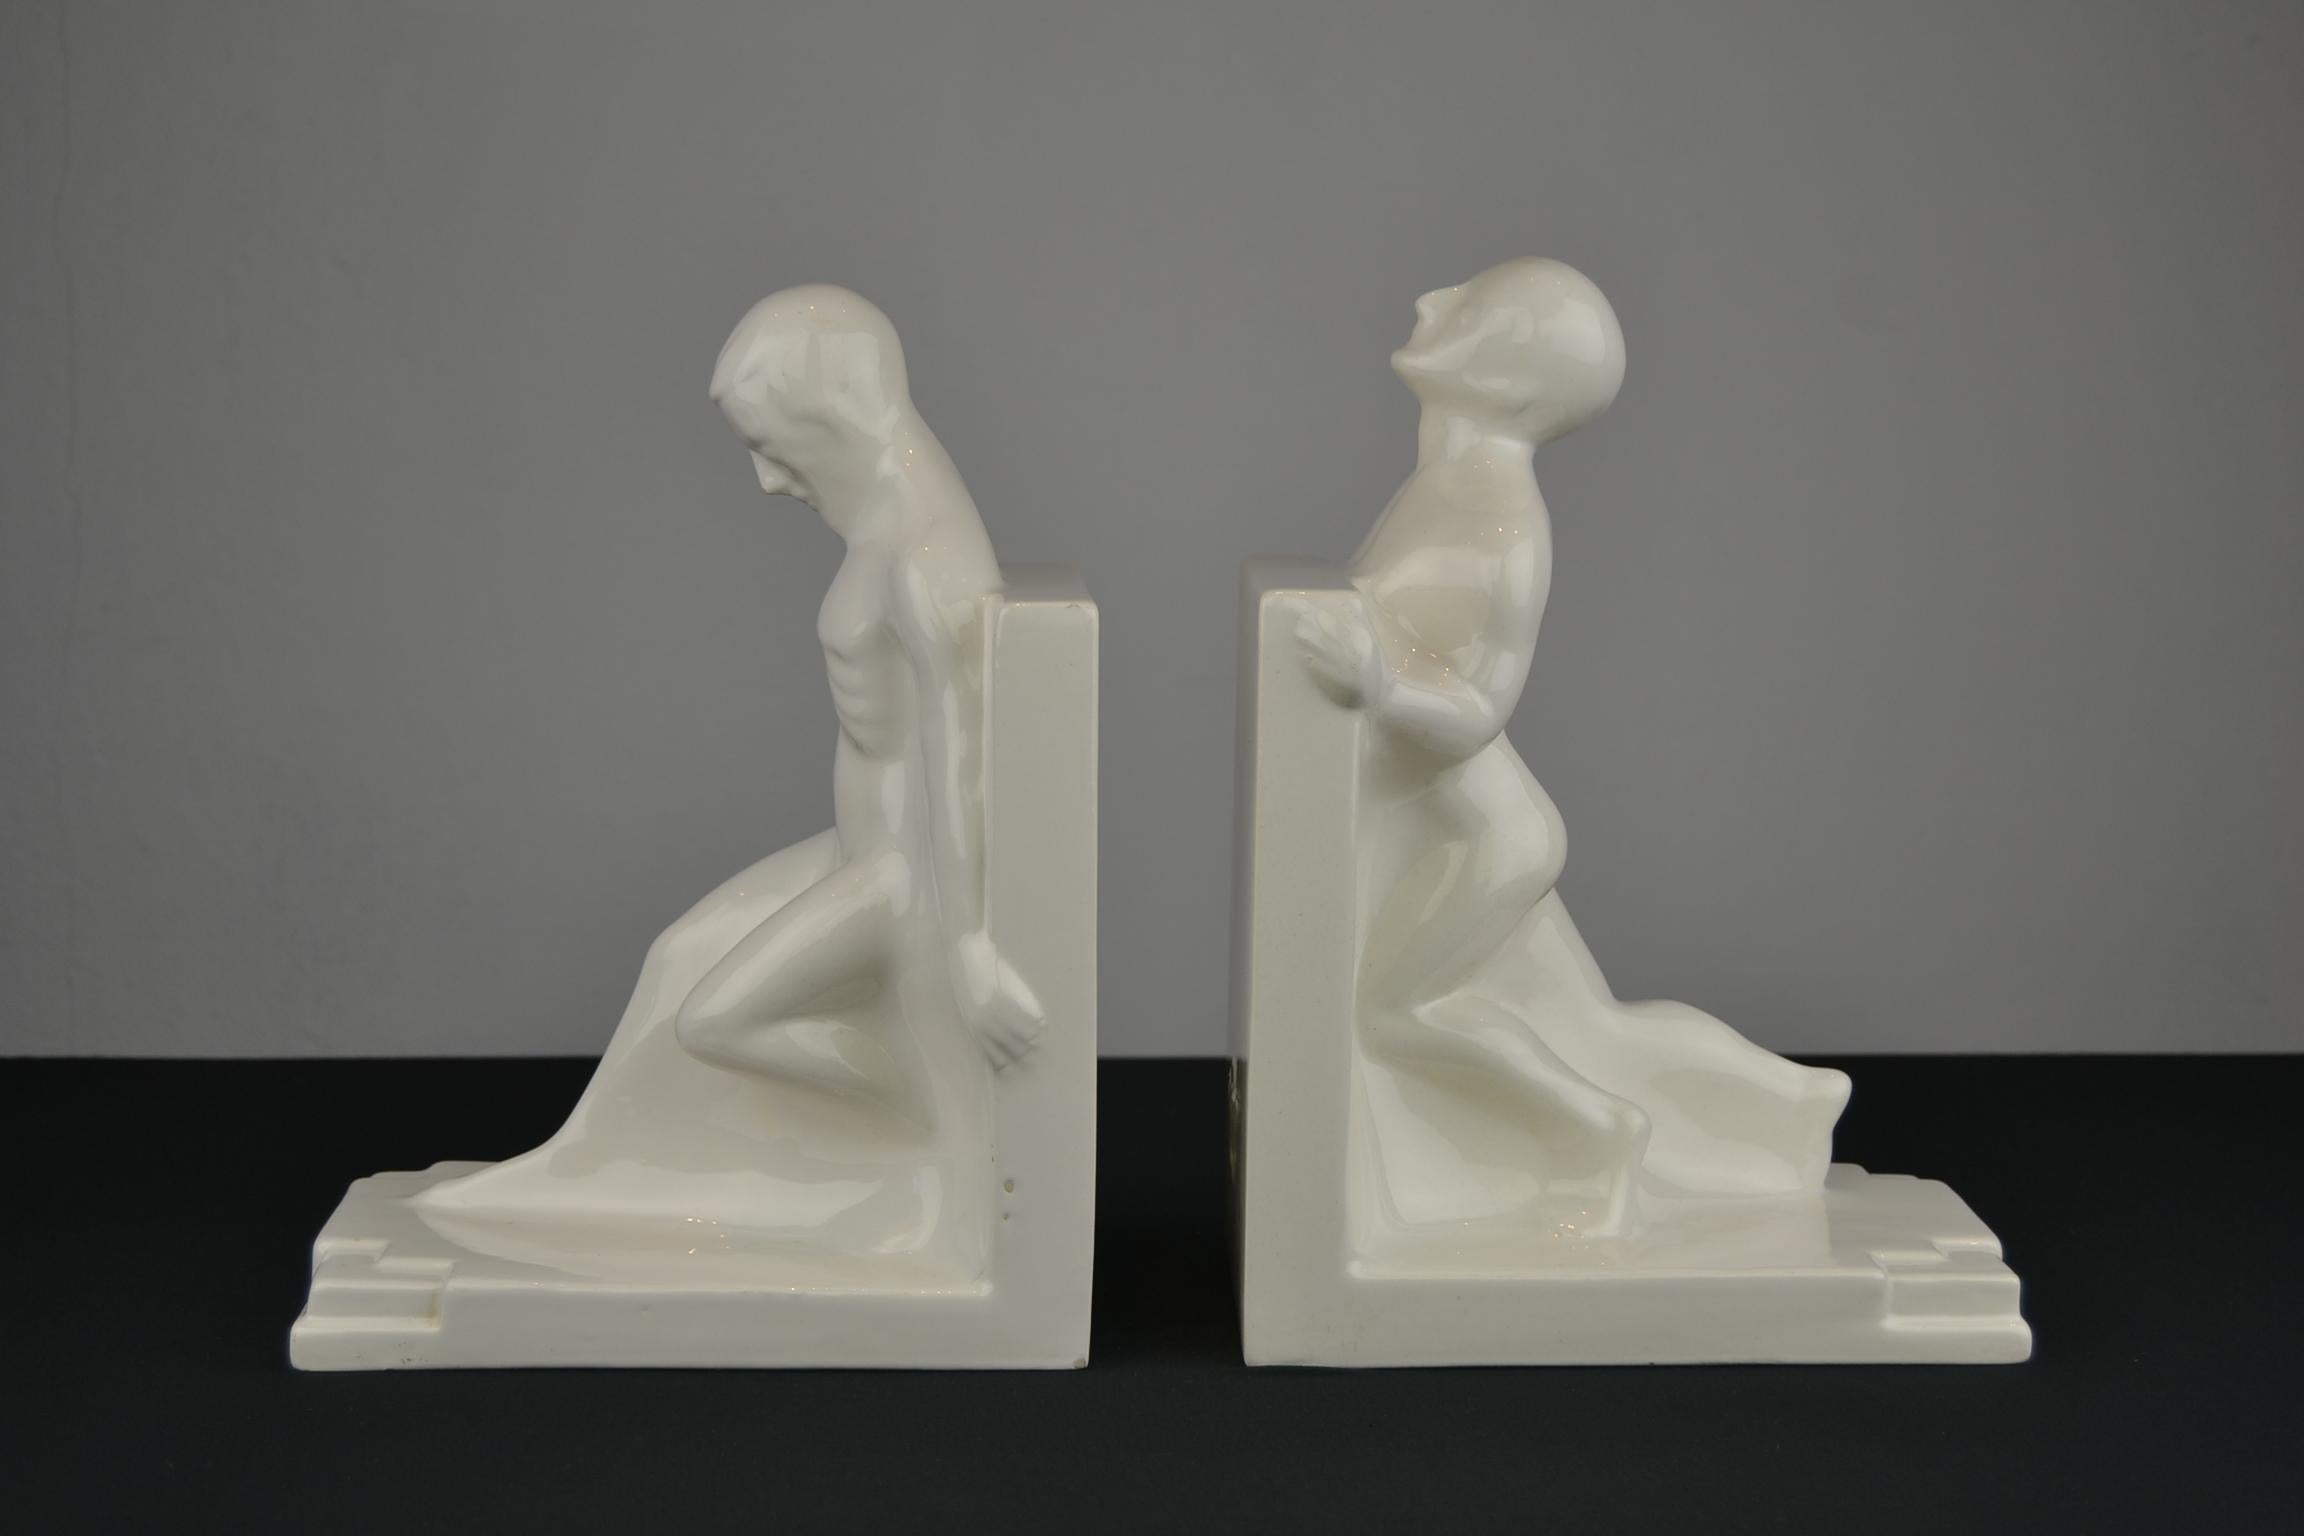 Large Art Deco Bookends with Nude Muscular Males in White Glazed Ceramic 13